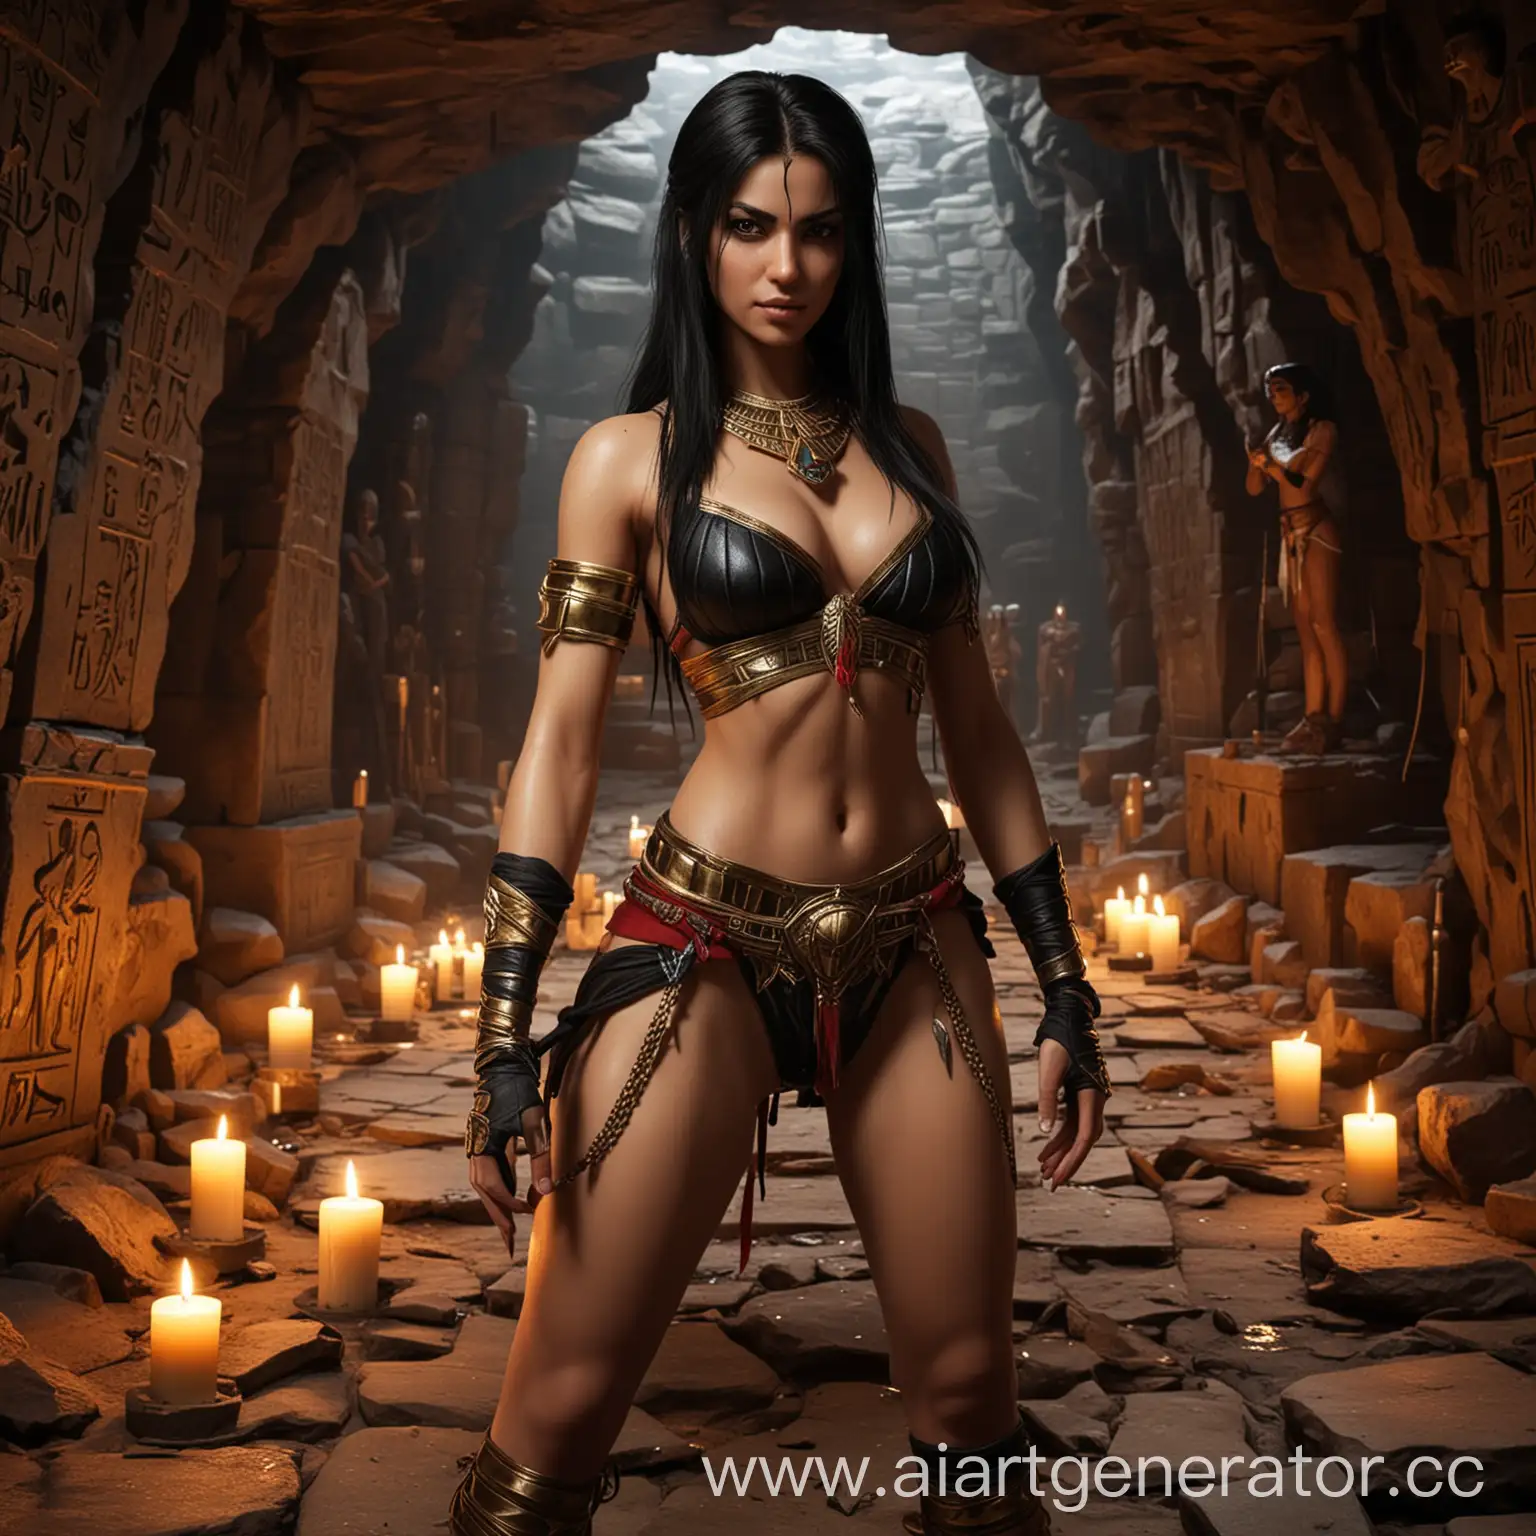 Egyptian-Style-Girl-in-Moral-Kombat-with-Candles-and-Thongs